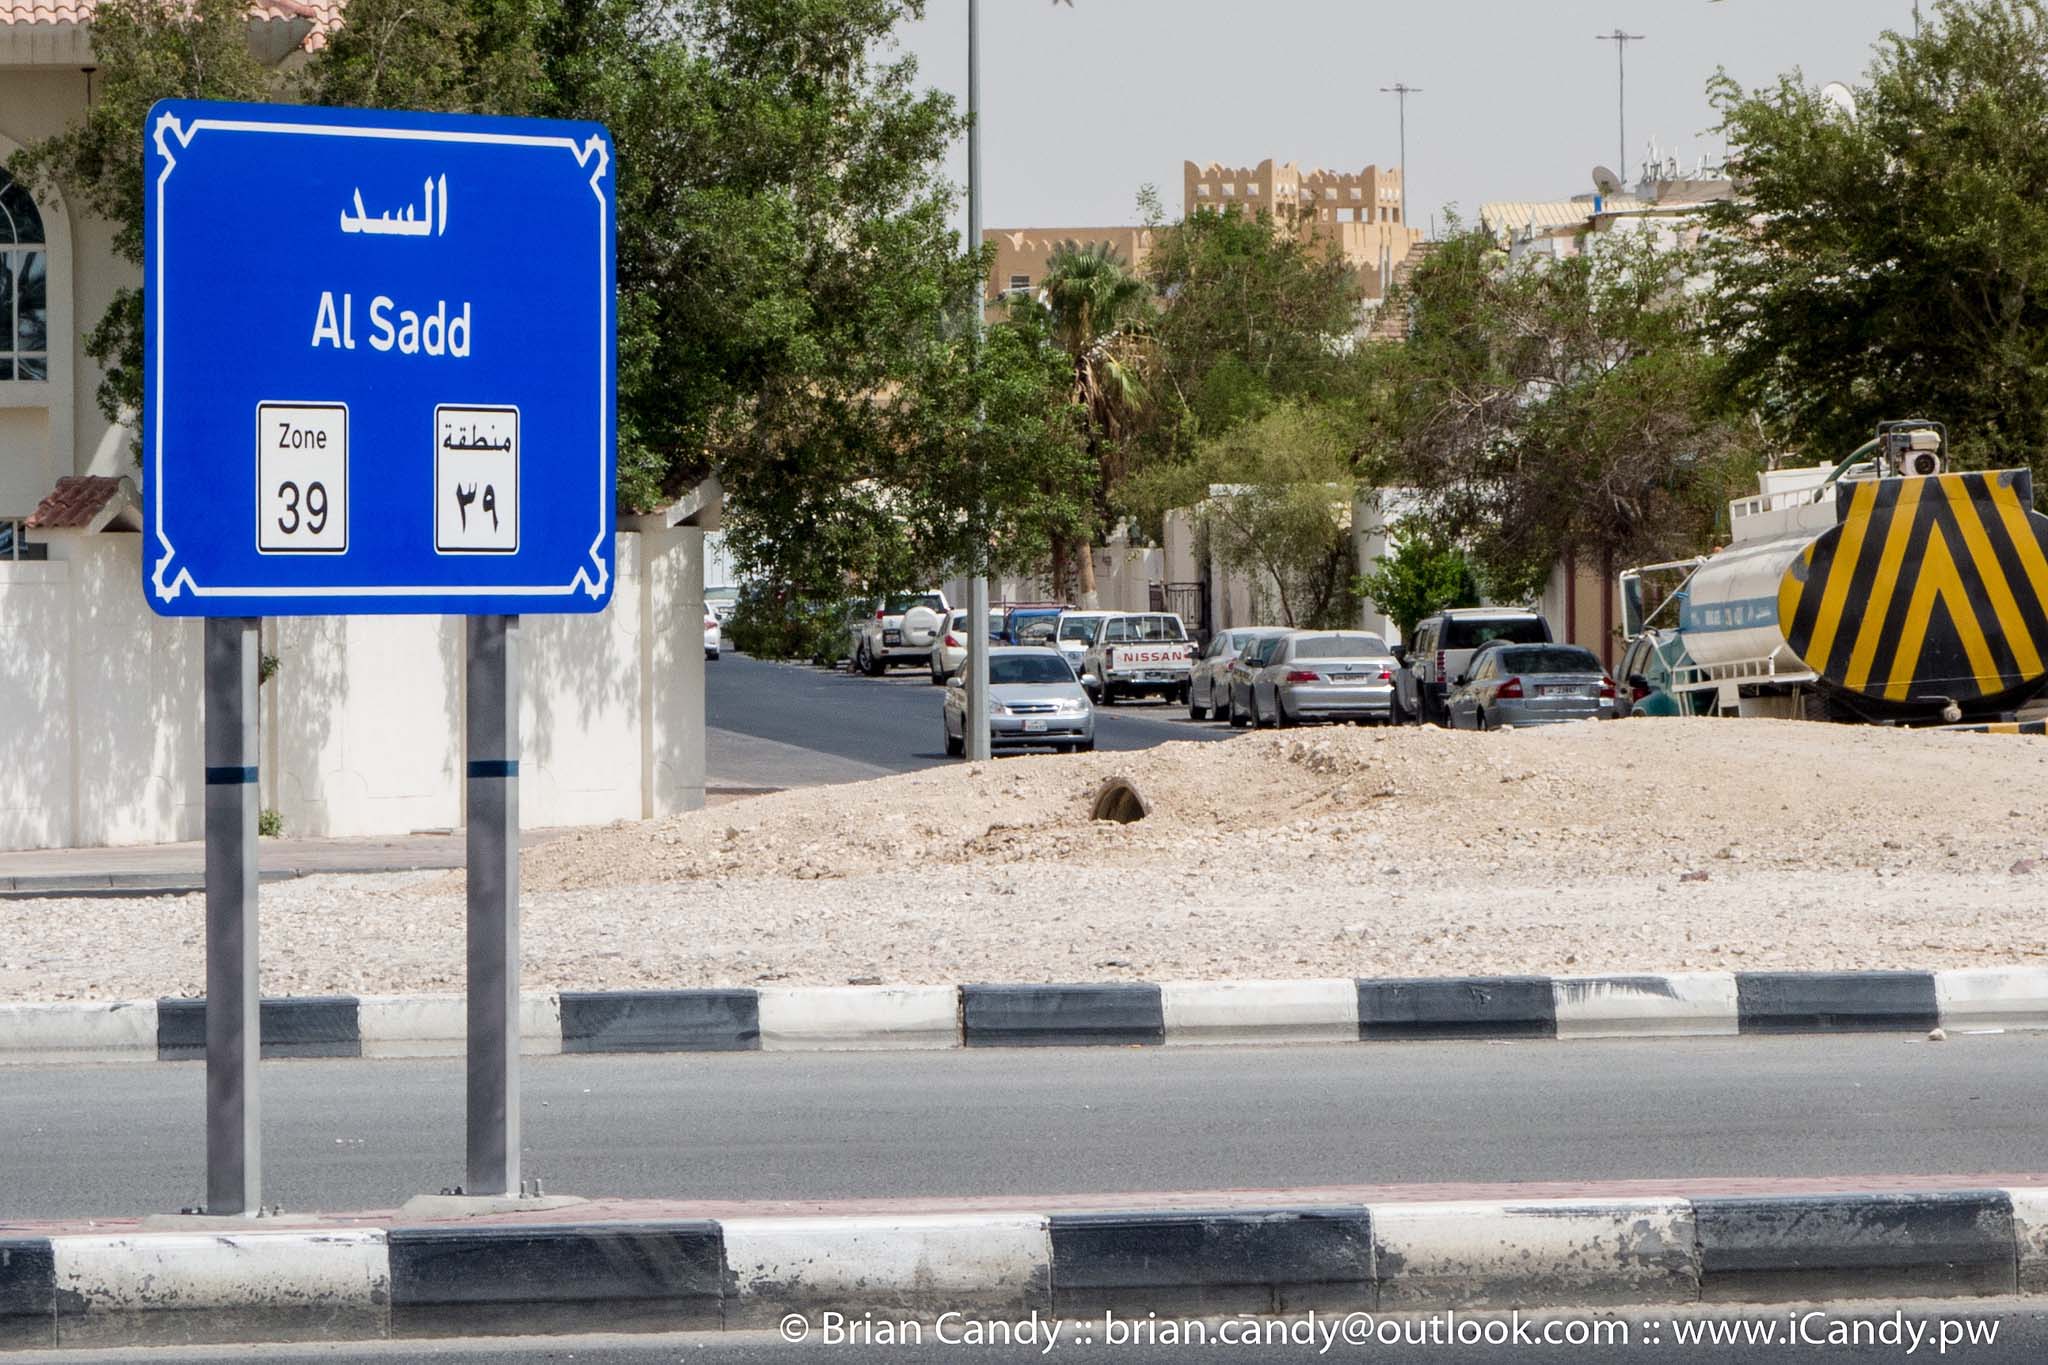 Here’s a list of areas in Qatar where you can own real estate as a foreigner